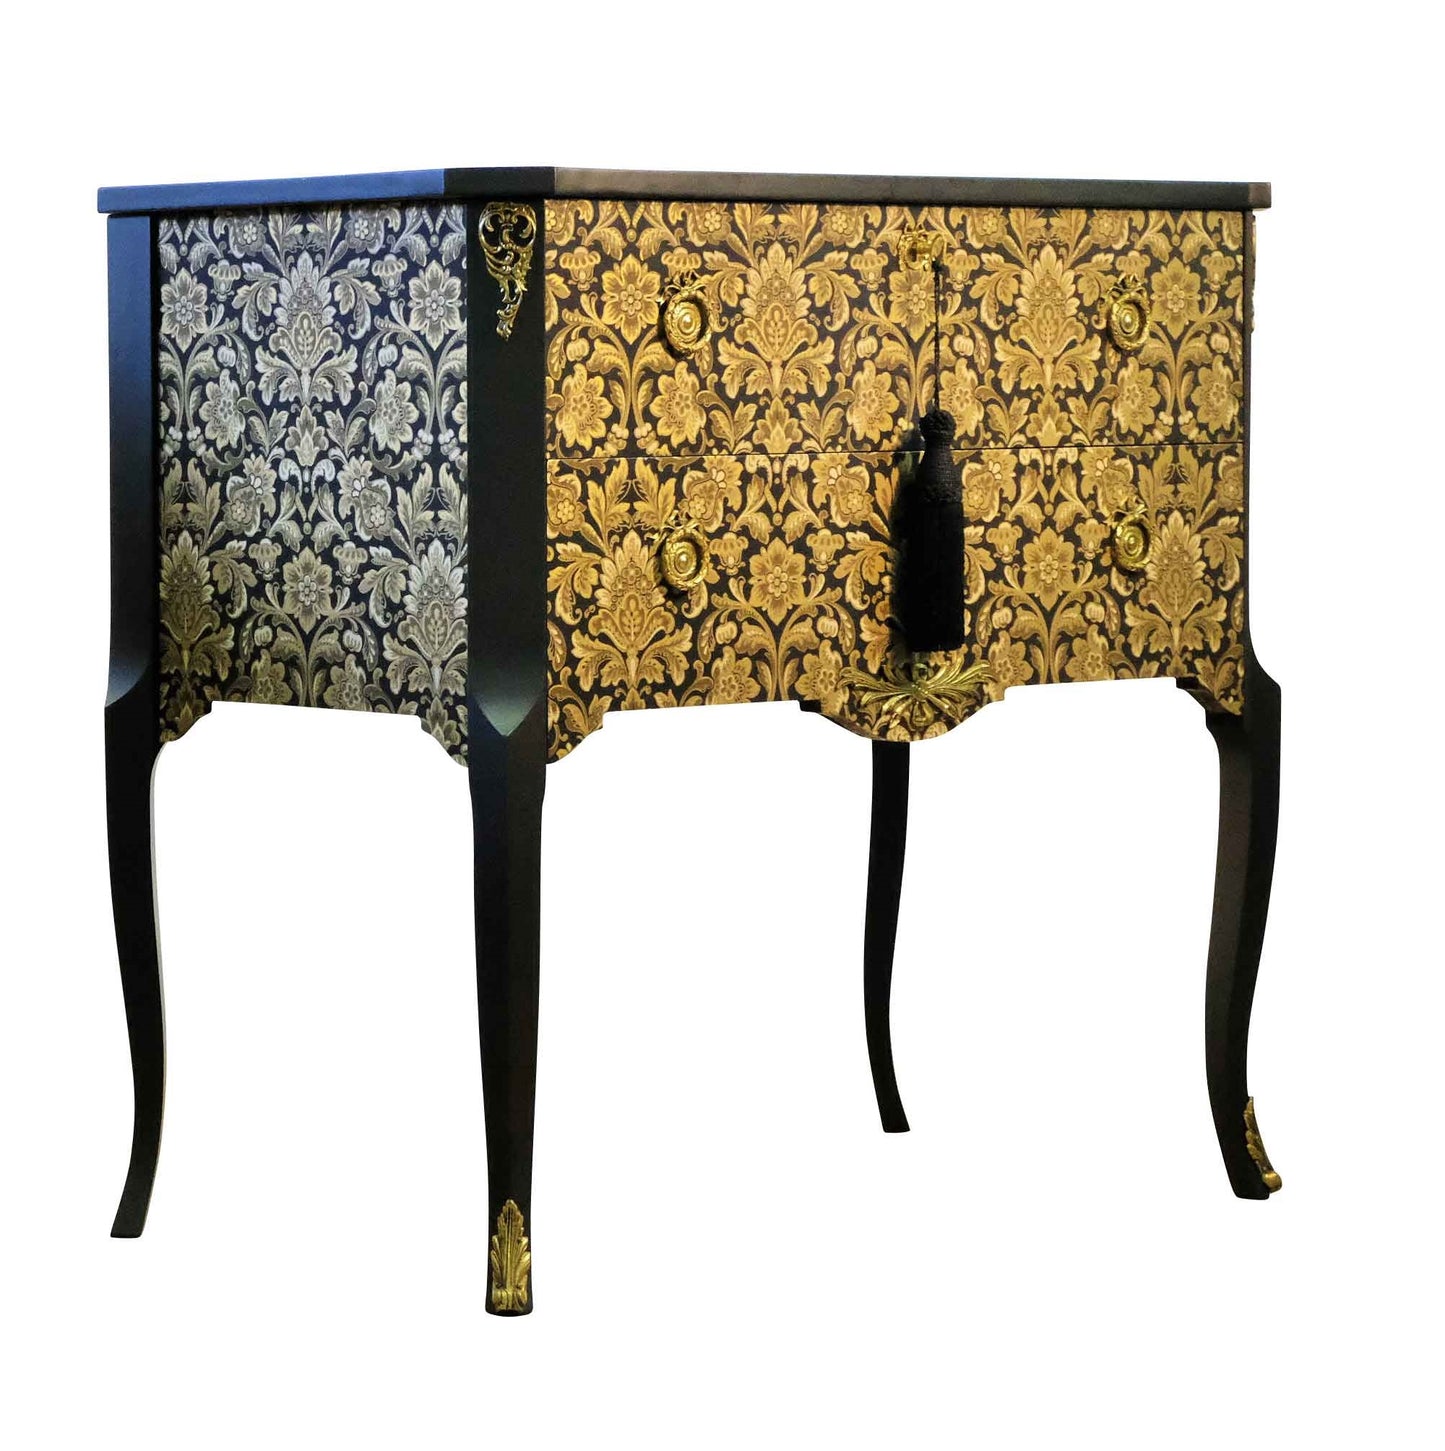 Gustavian Style Commode with Floral Design (Single)